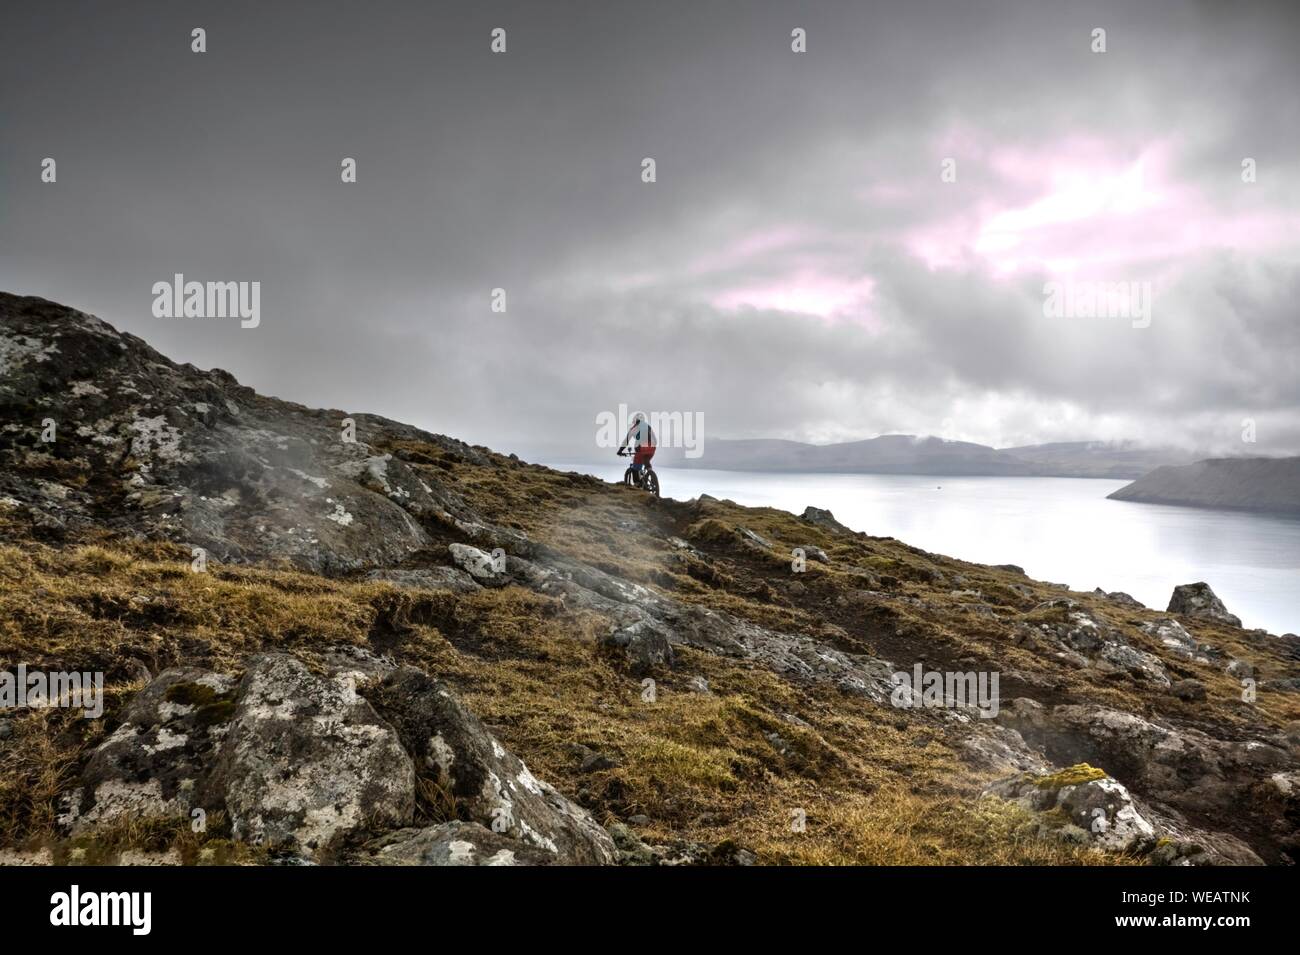 Person Mountain Biking On Rocky Cliff By Lake Against Cloudy Sky Stock Photo